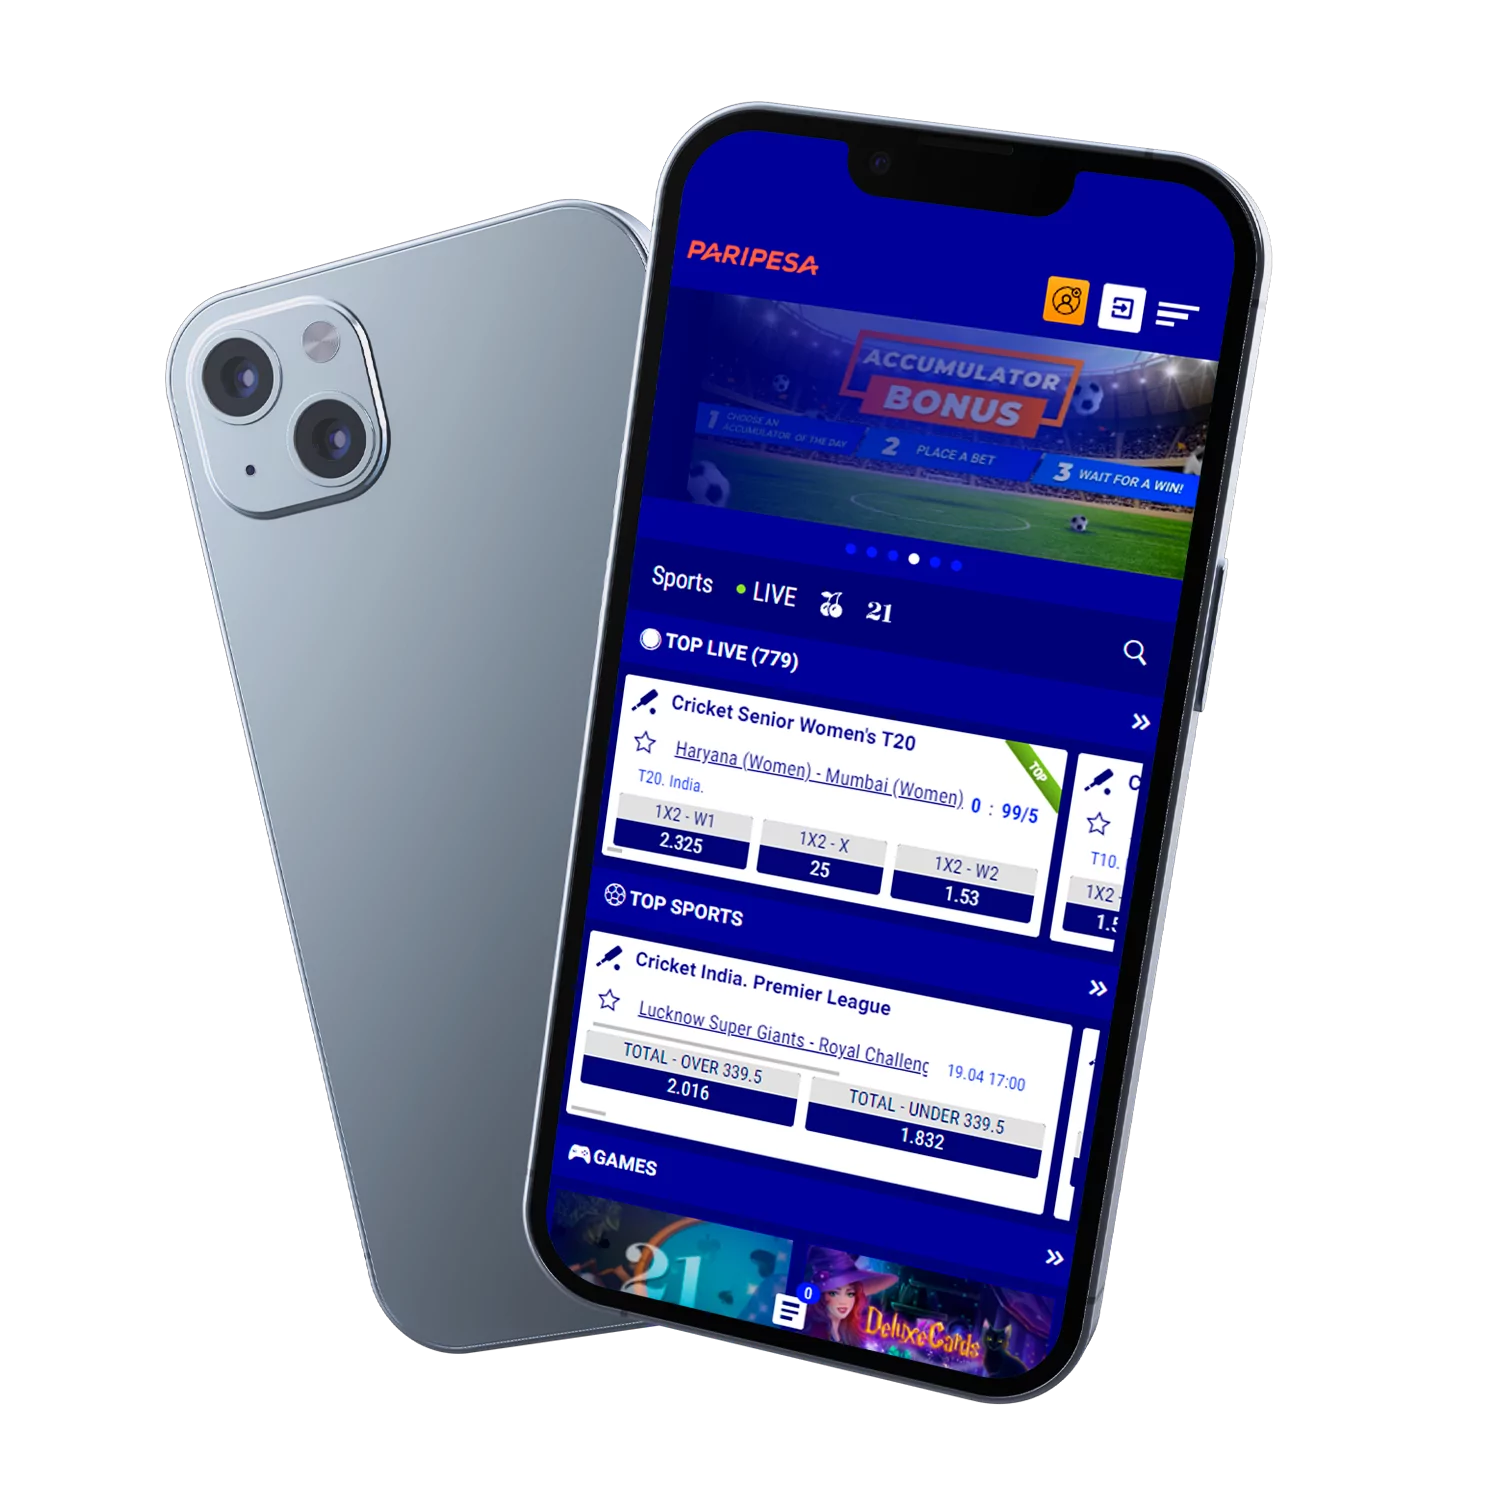 The Paripesa app can be downloaded for free for cricket betting.